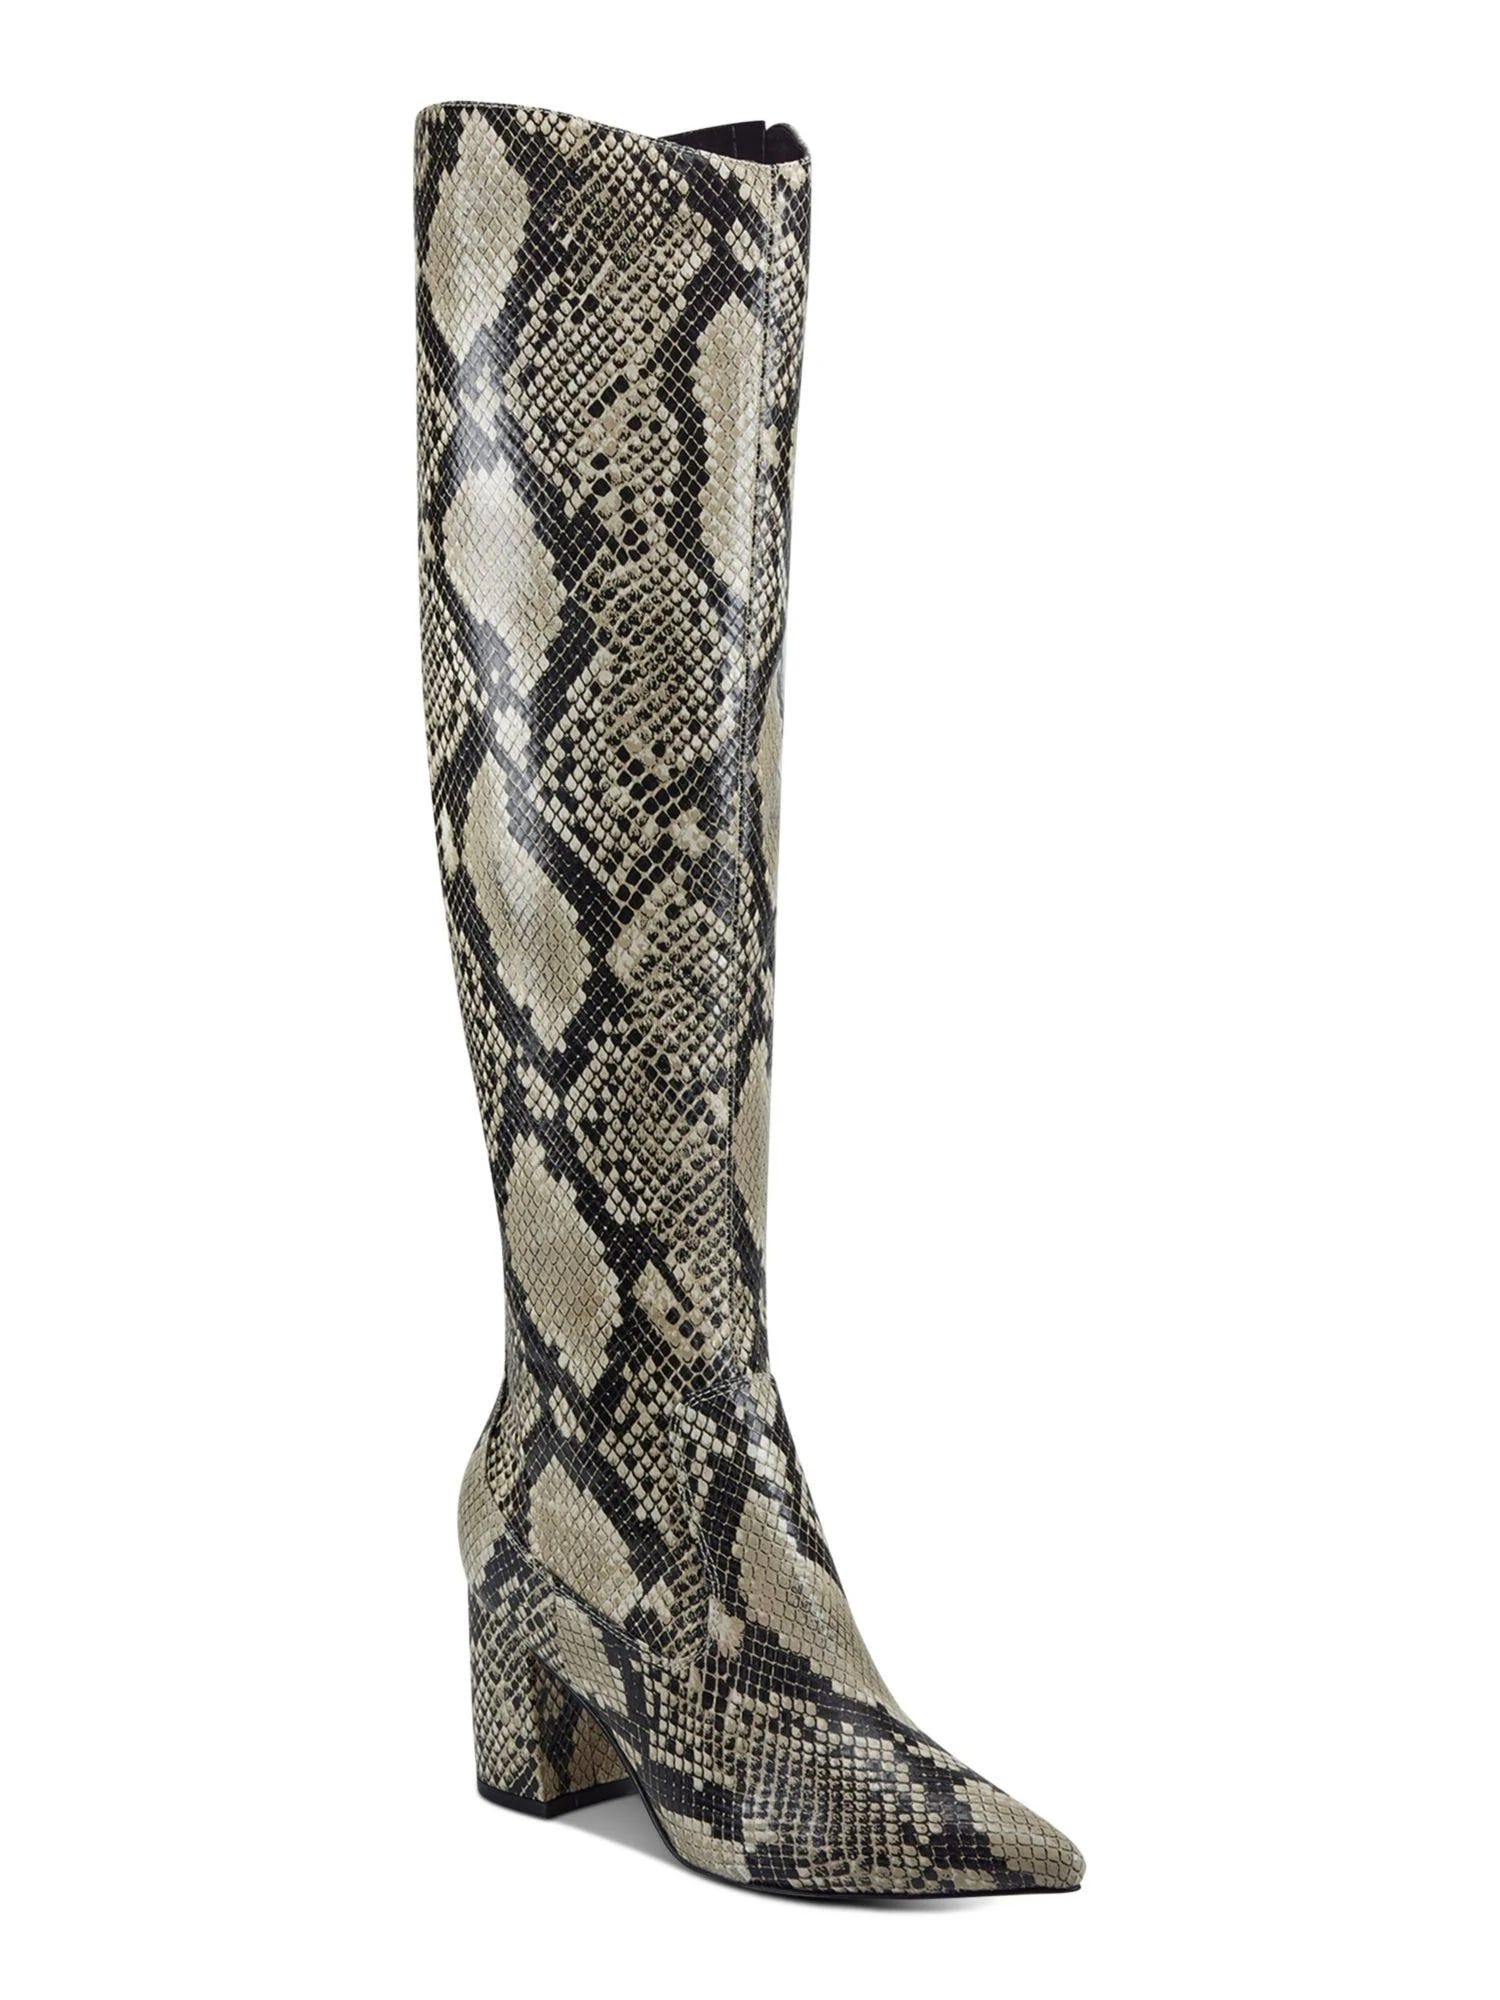 Fashionable Snakeskin Over-The-Knee Boot | Image